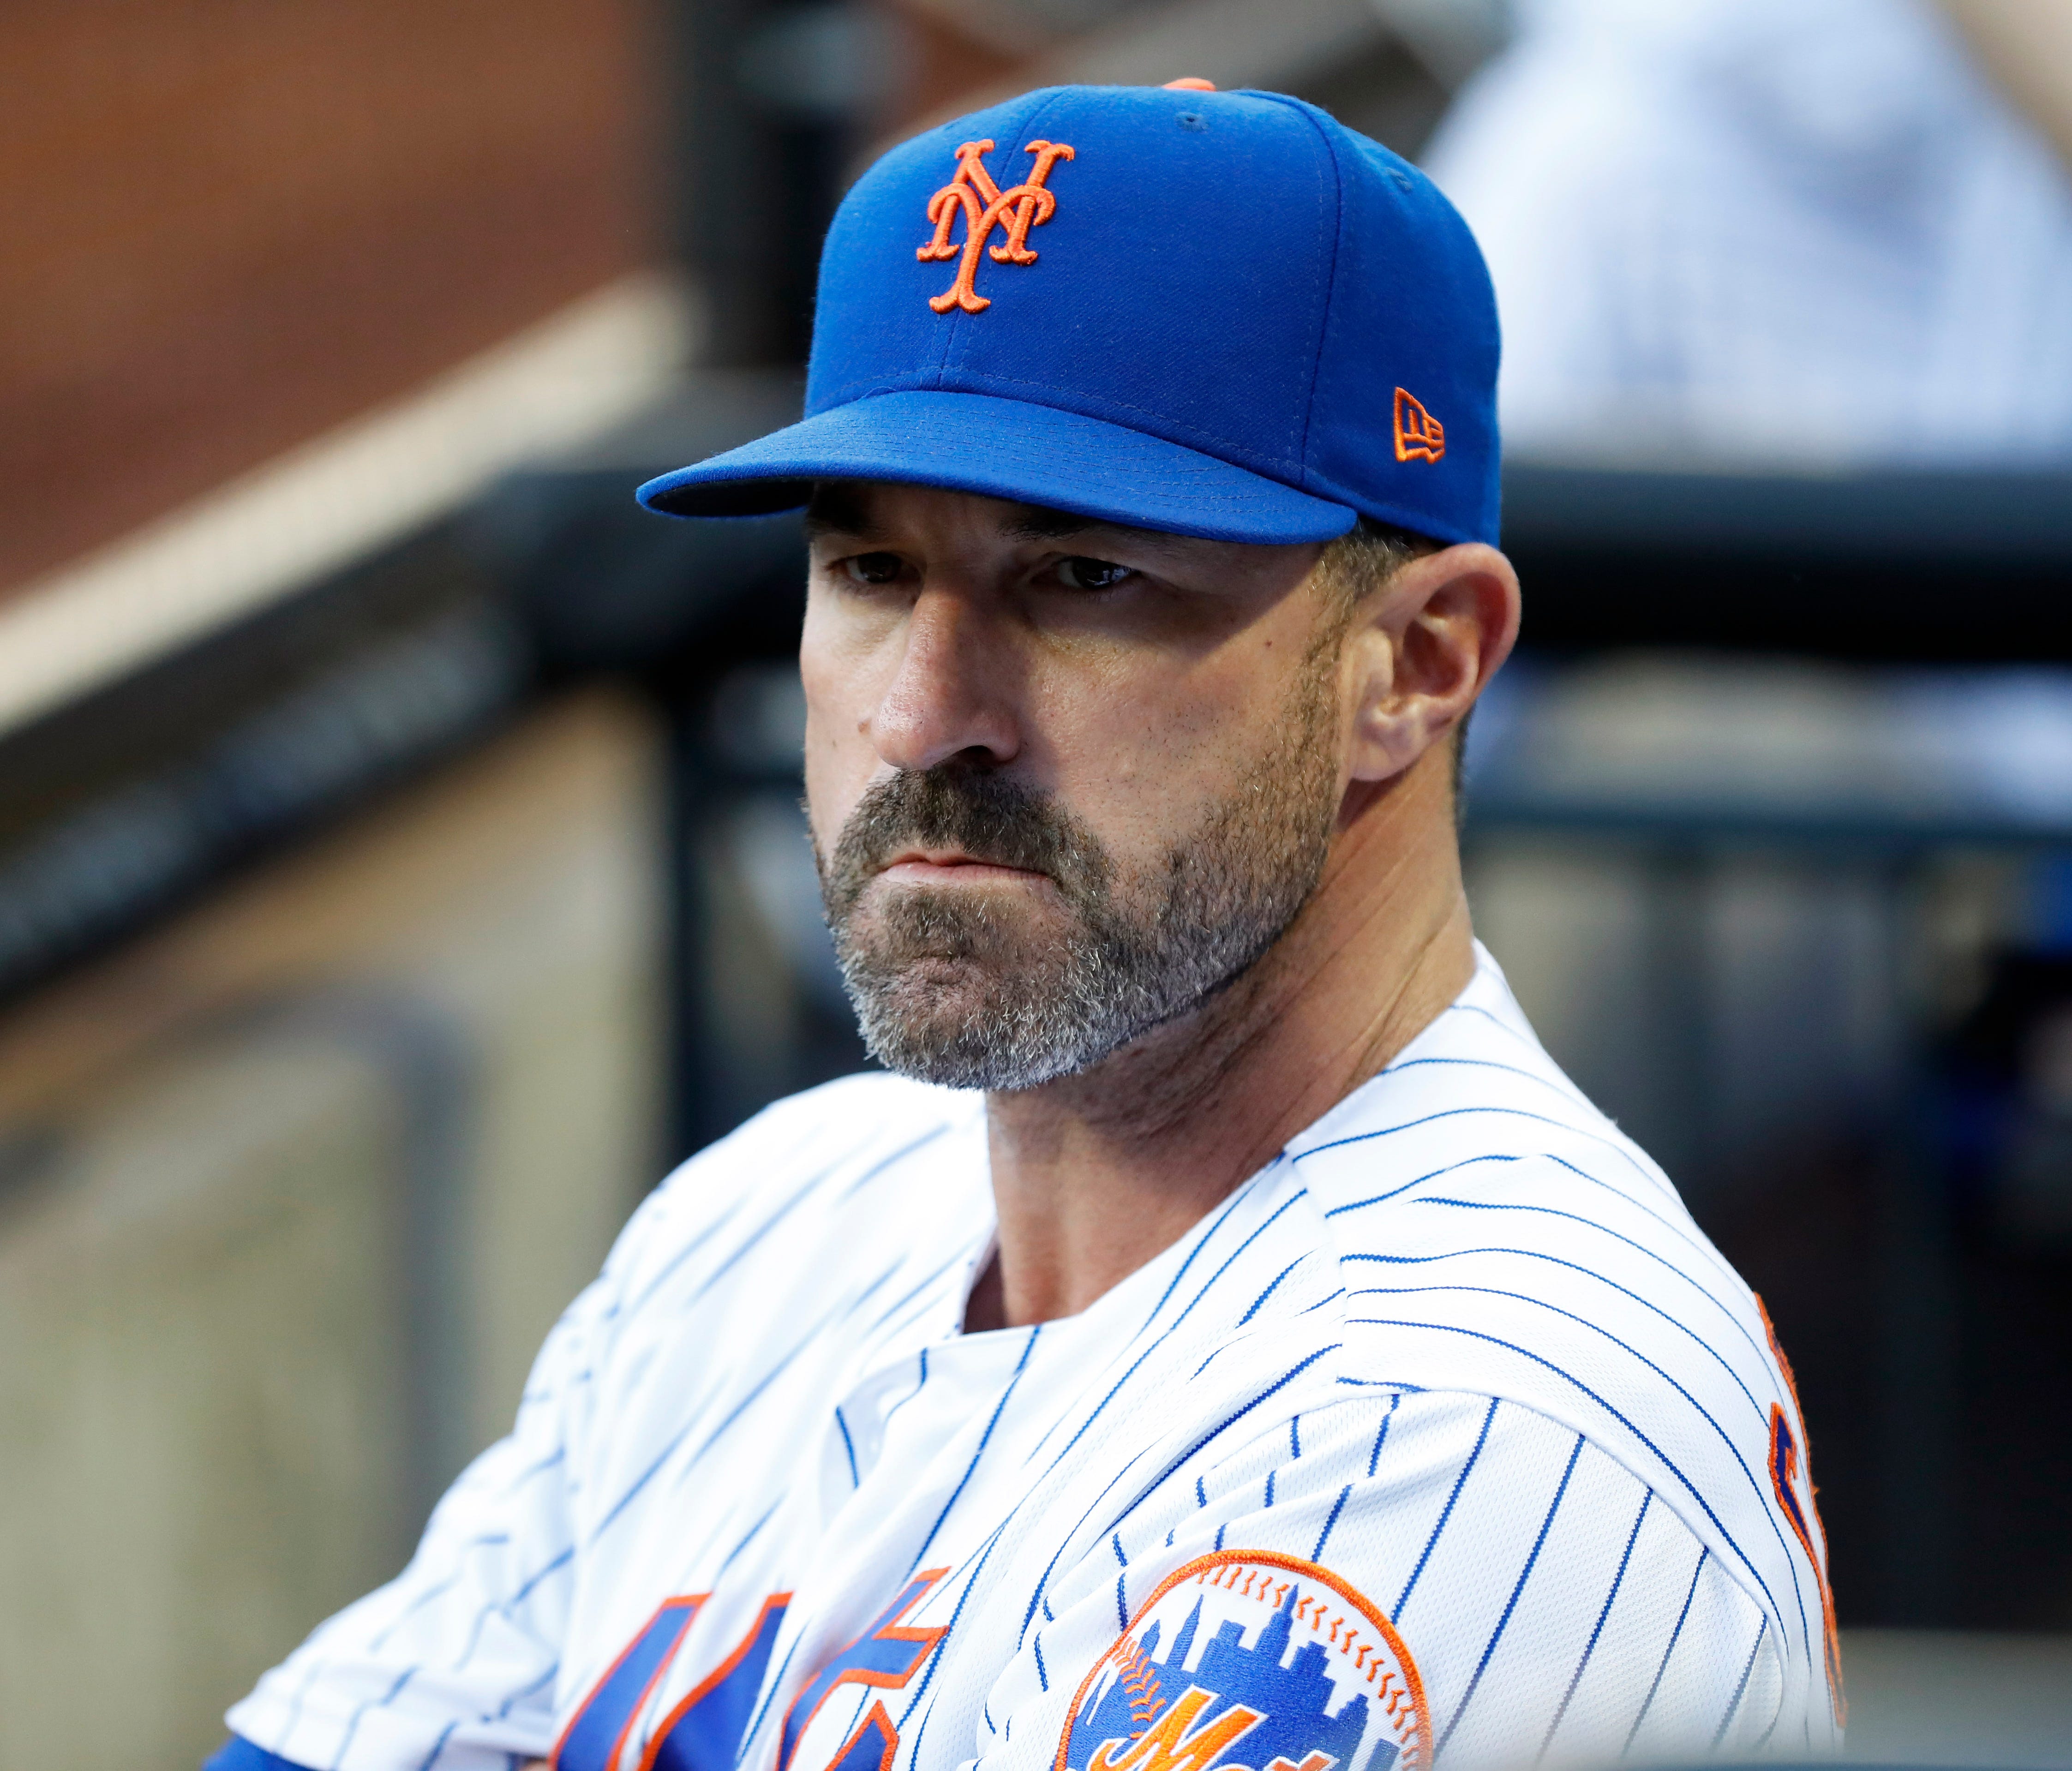 Mickey Callaway is in his first season as manager of the Mets.